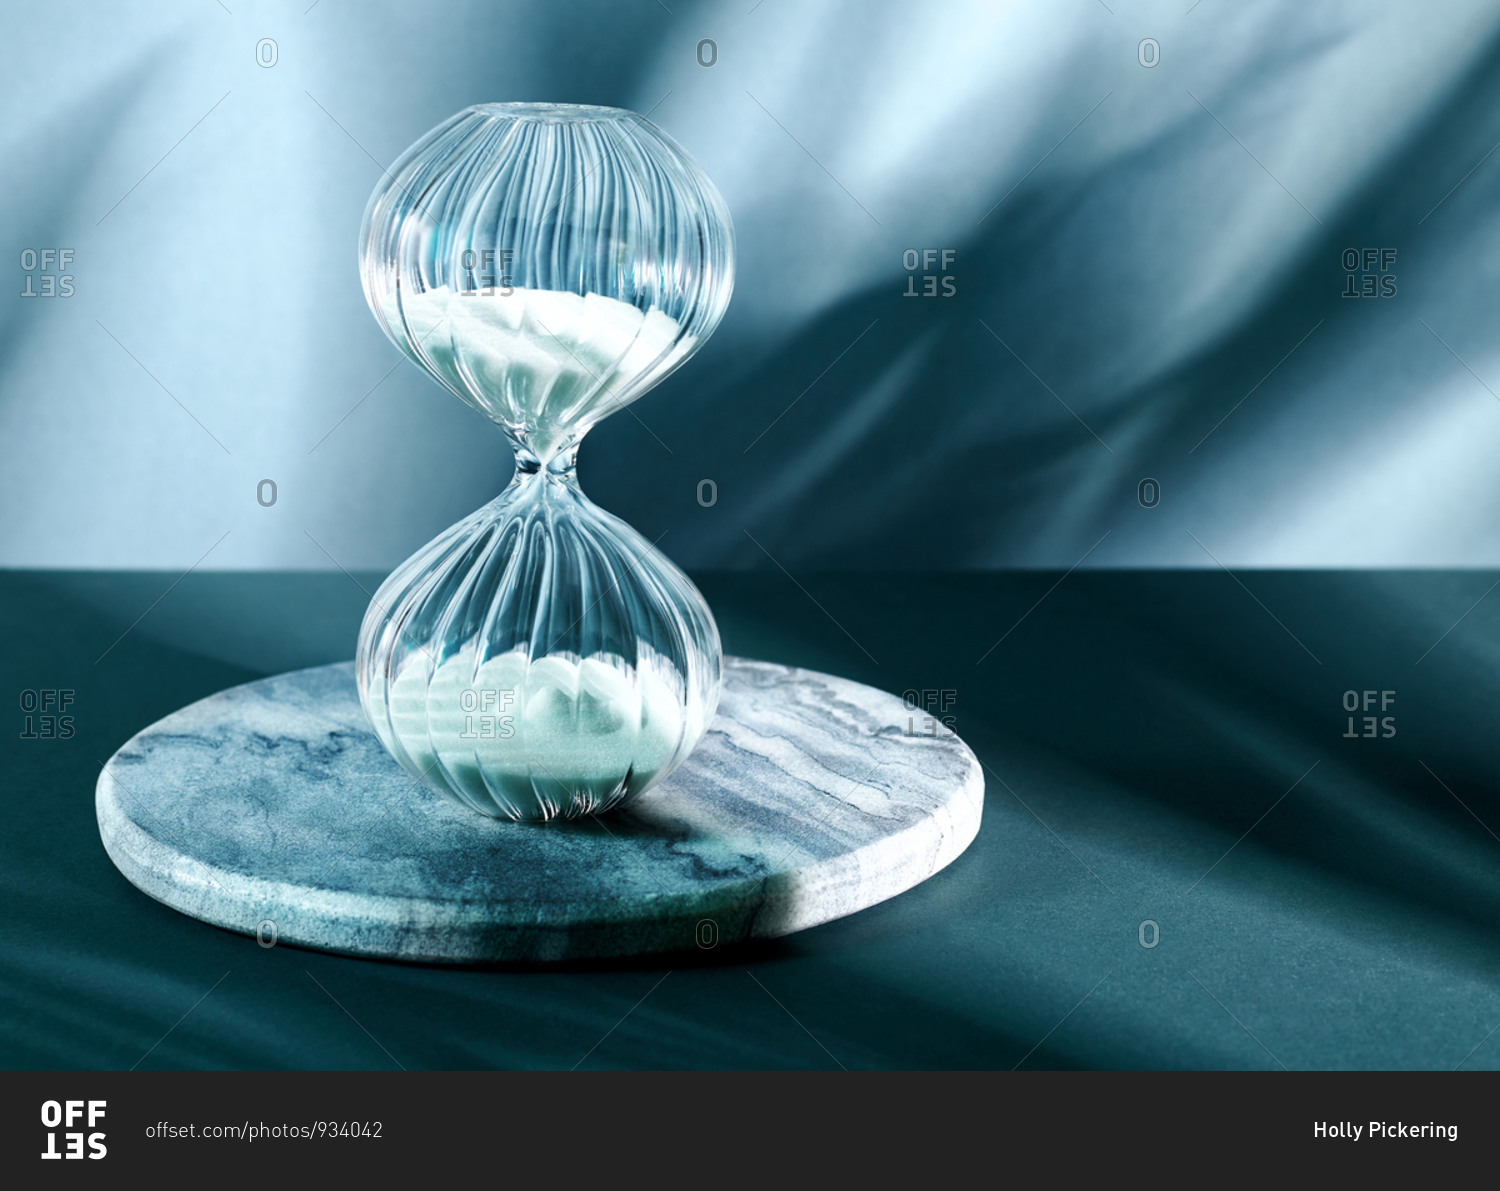 A decorative glass hourglass sand timer against a shadowy blue background